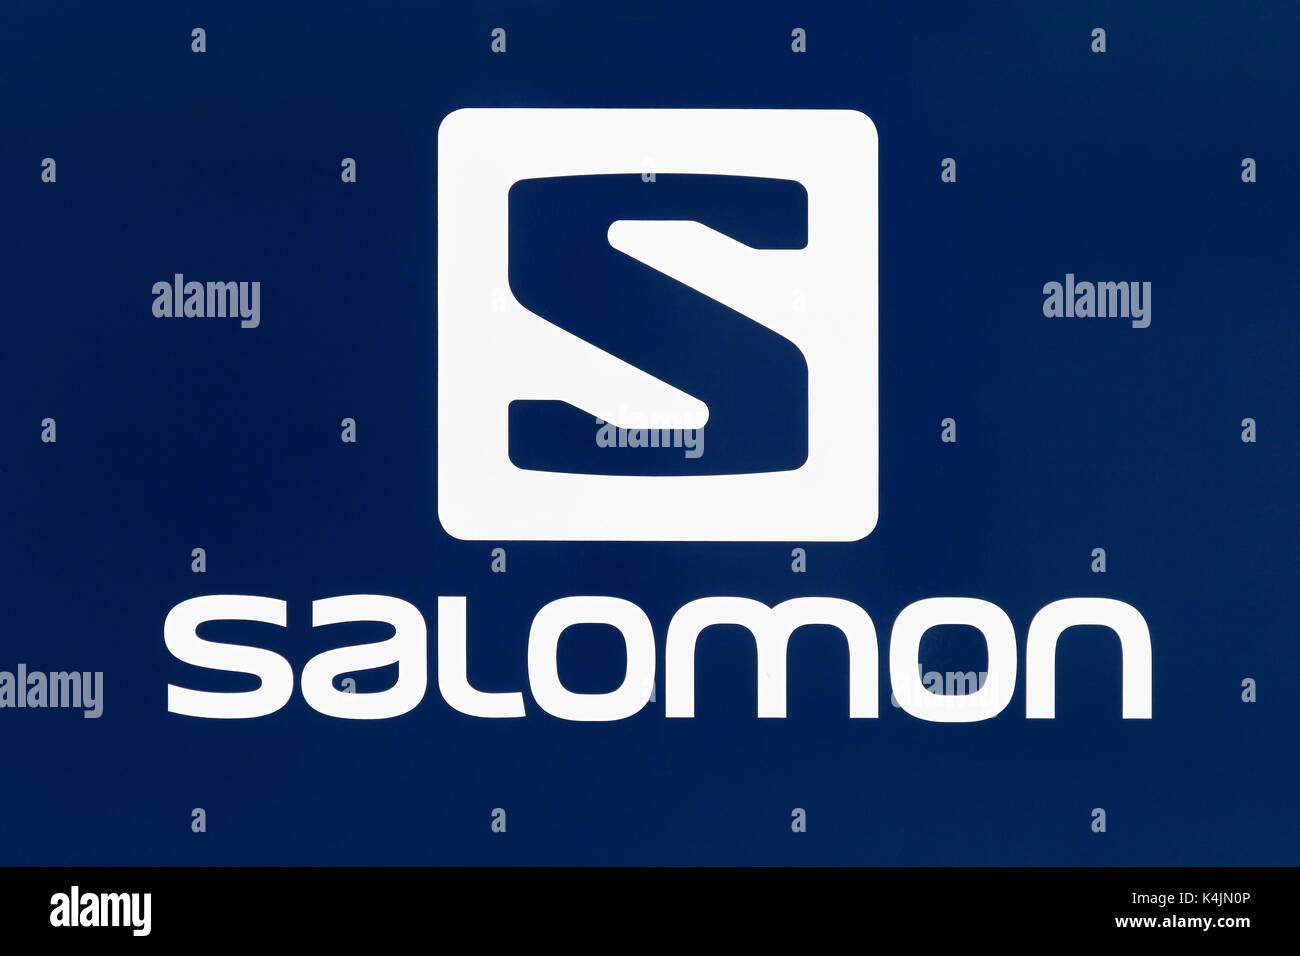 Logstor, Denmark - August 23, 2017: Salomon logo on a wall. Salomon is a sports equipment manufacturing company that originated in Annecy, France Stock Photo